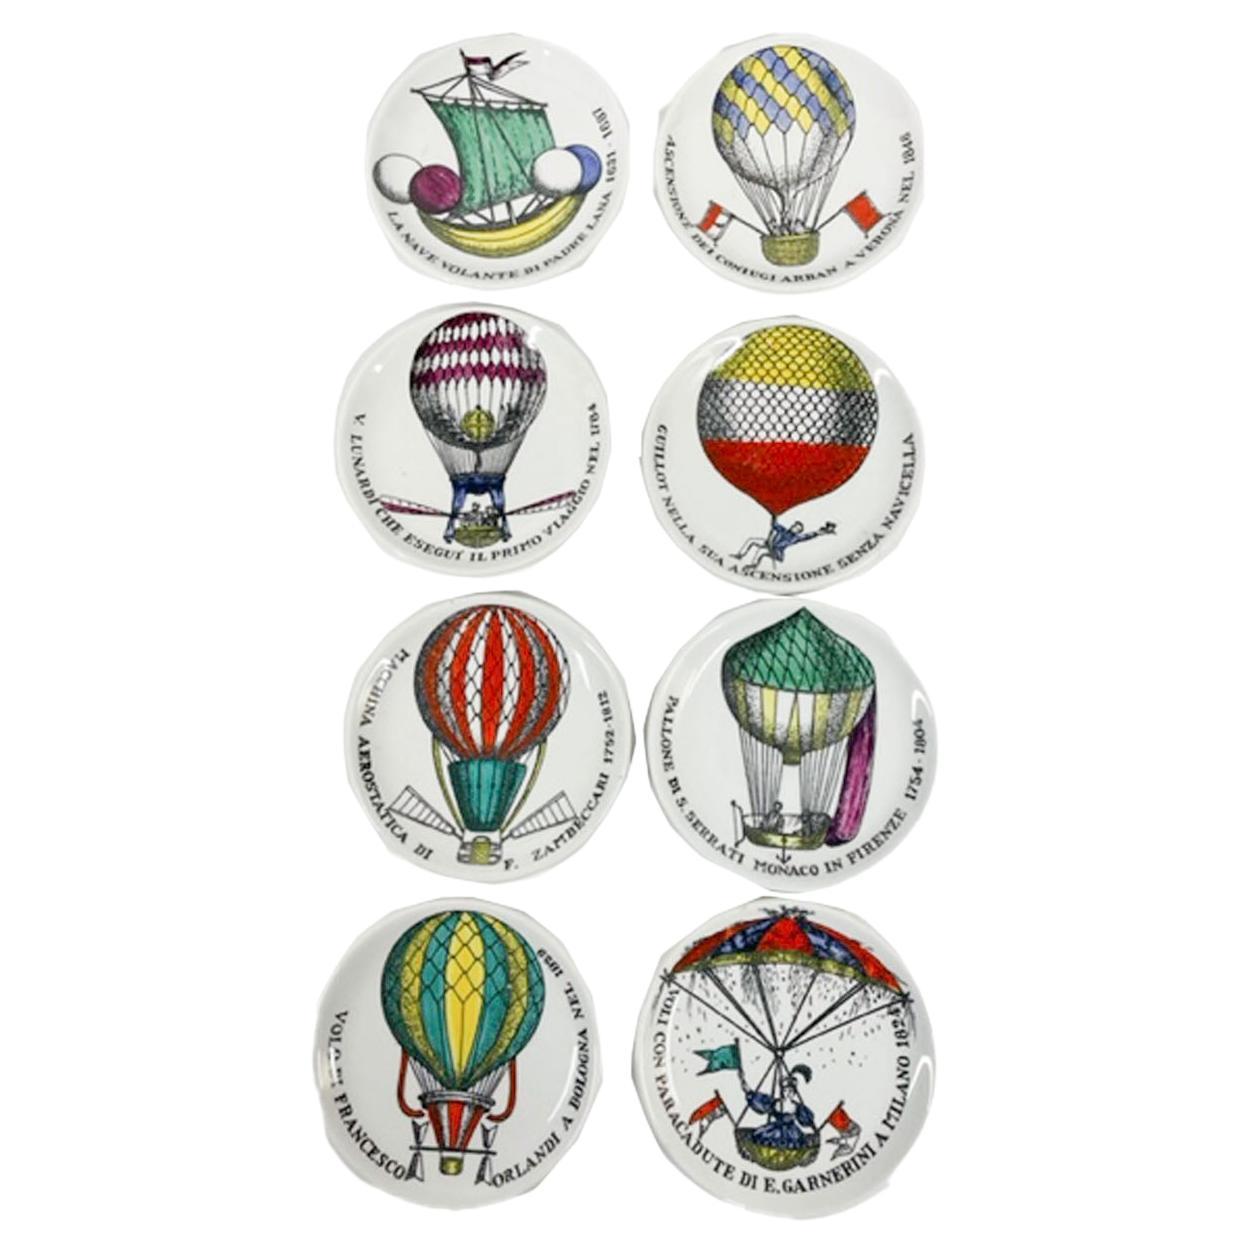 MCM Ceramic Coasters by Fornasetti, Painted with Hot Air Balloons, "Palloni"